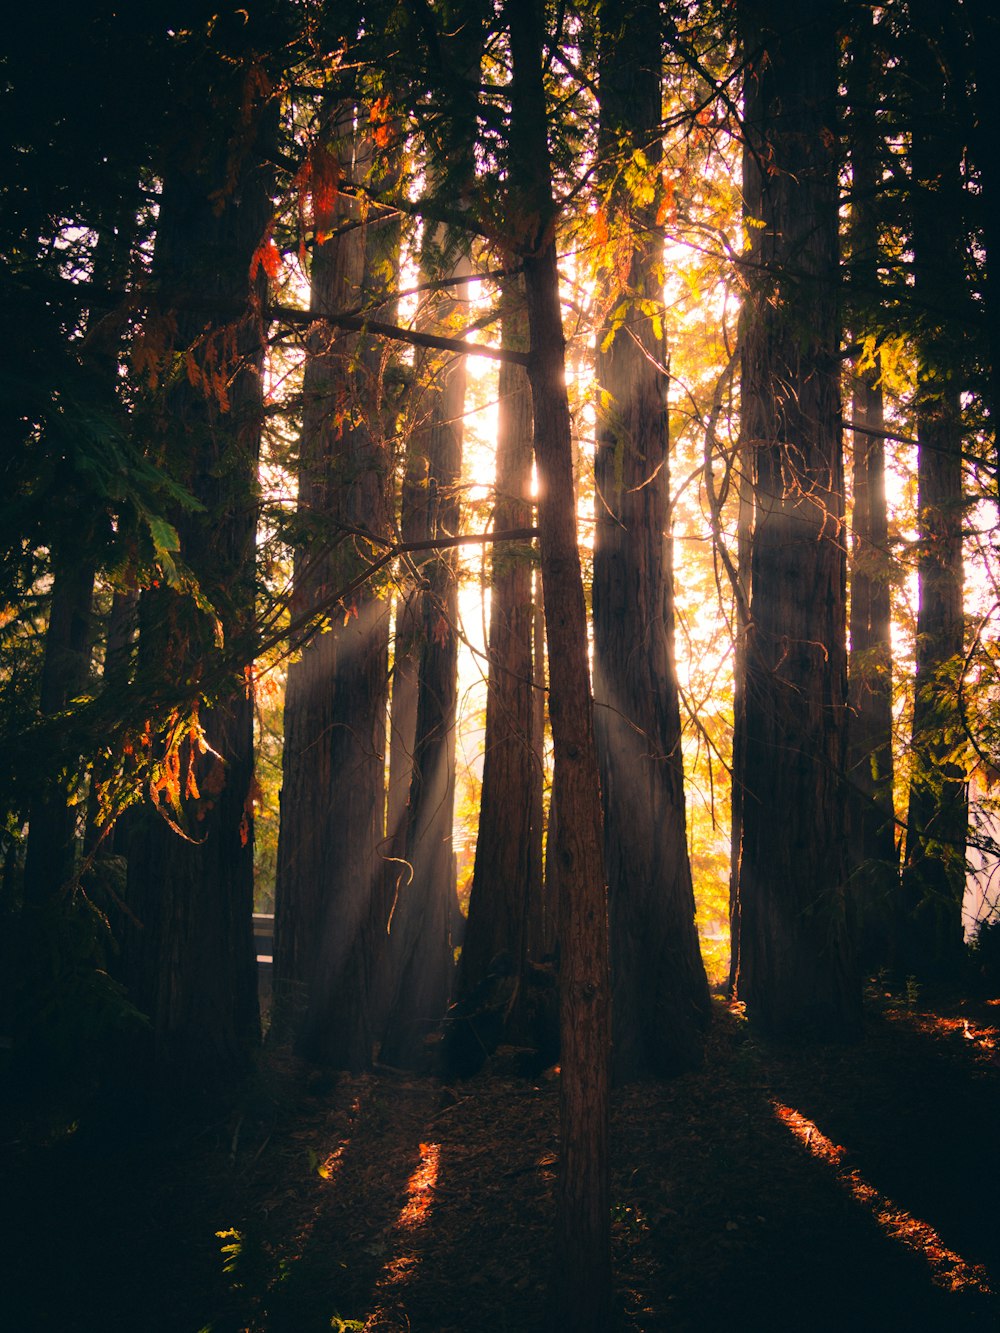 sunlight shining through the trees in a forest